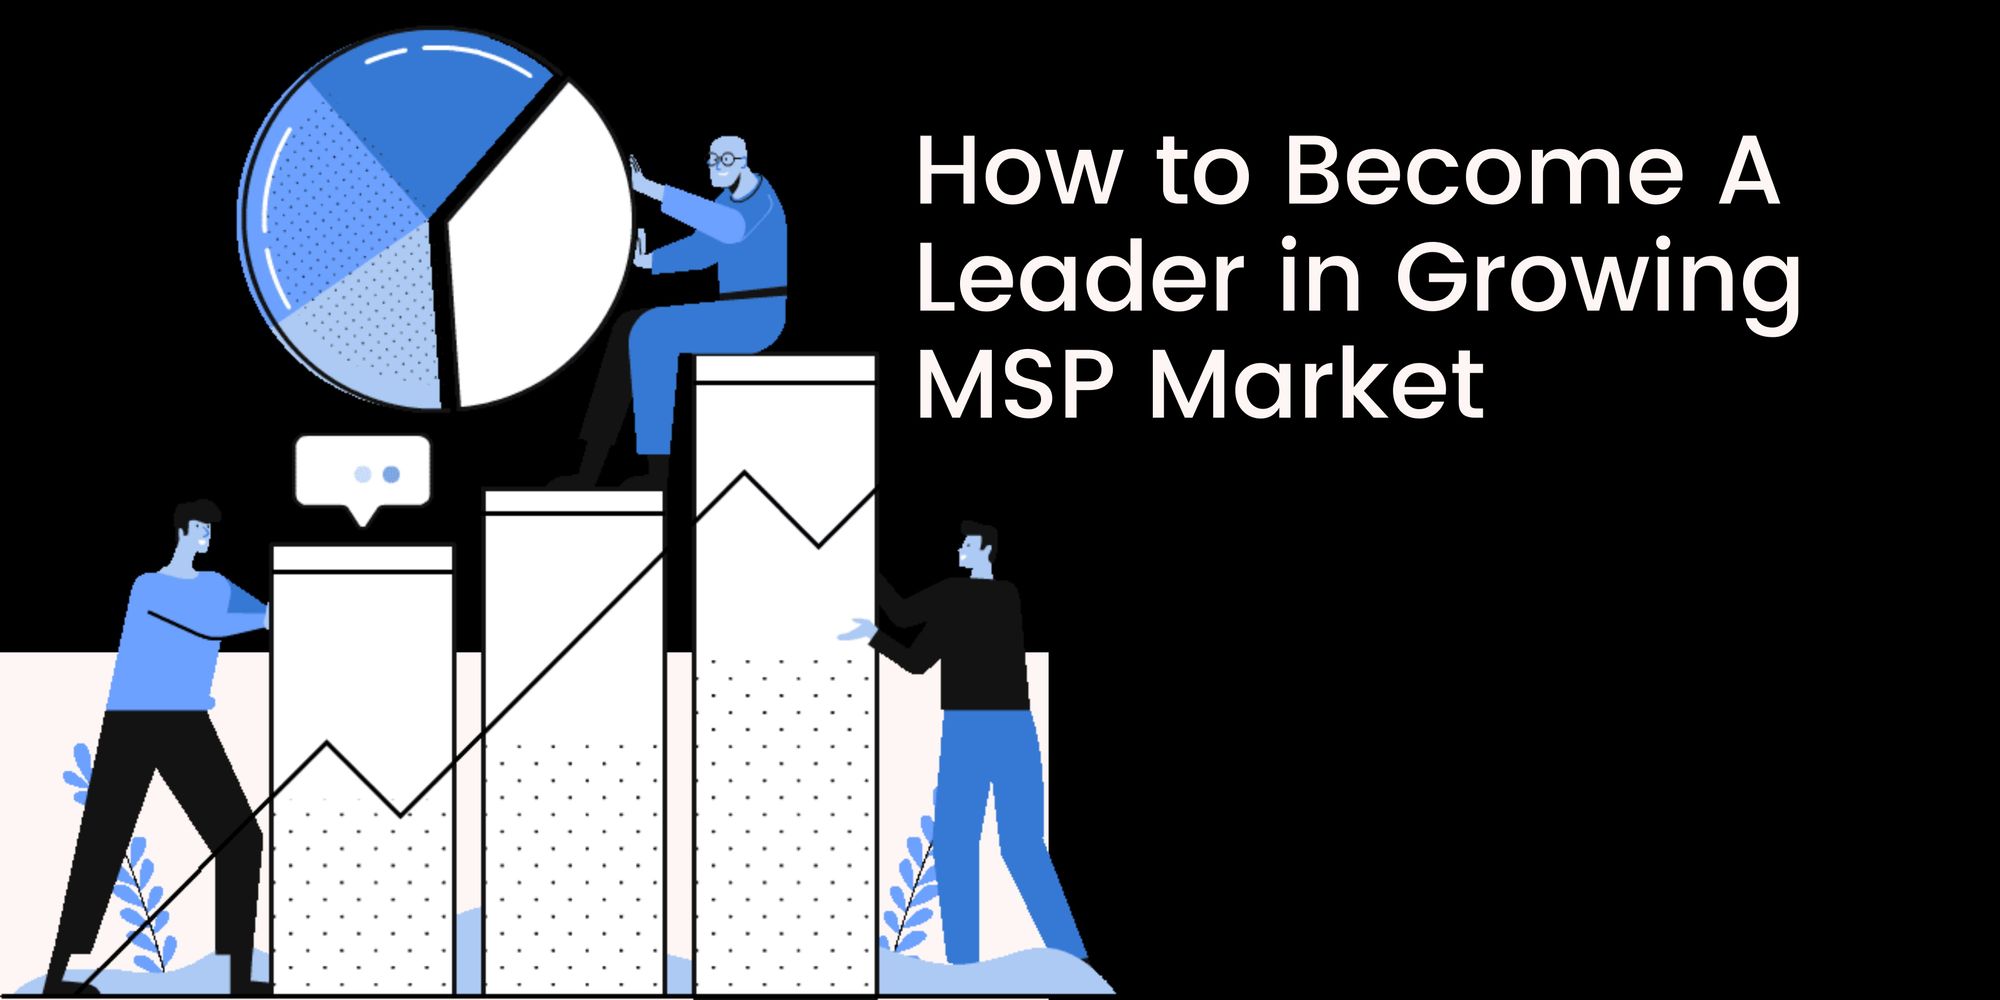 How to Become A Leader in Growing MSP Market